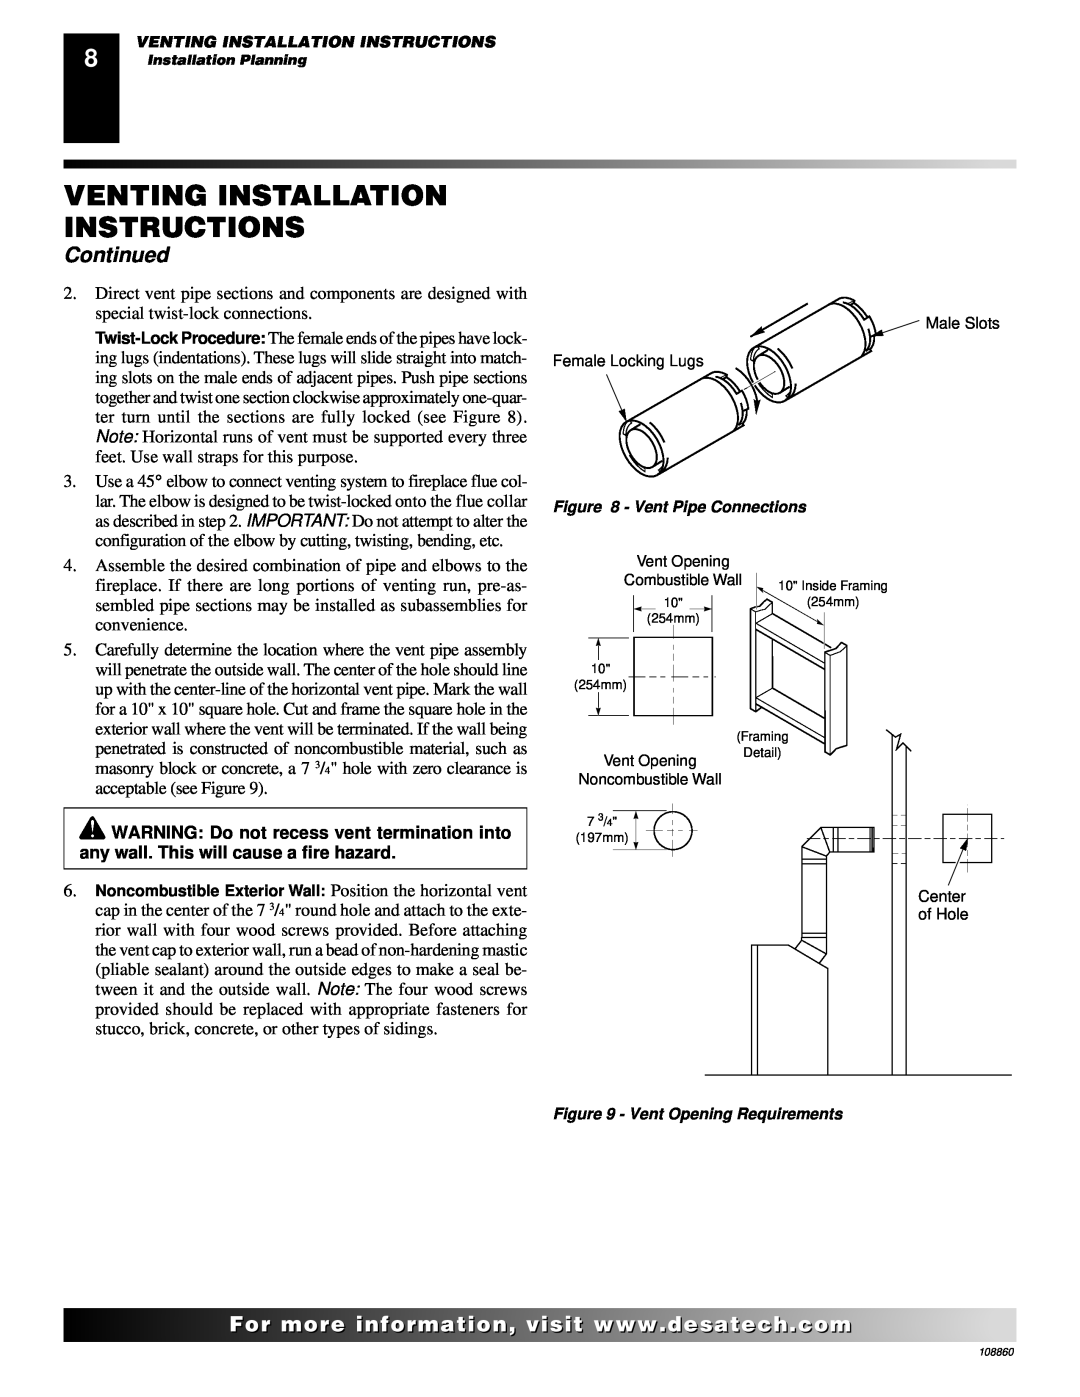 Desa (V)T32EP Venting Installation Instructions, Continued, Male Slots Female Locking Lugs, Vent Pipe Connections, Center 